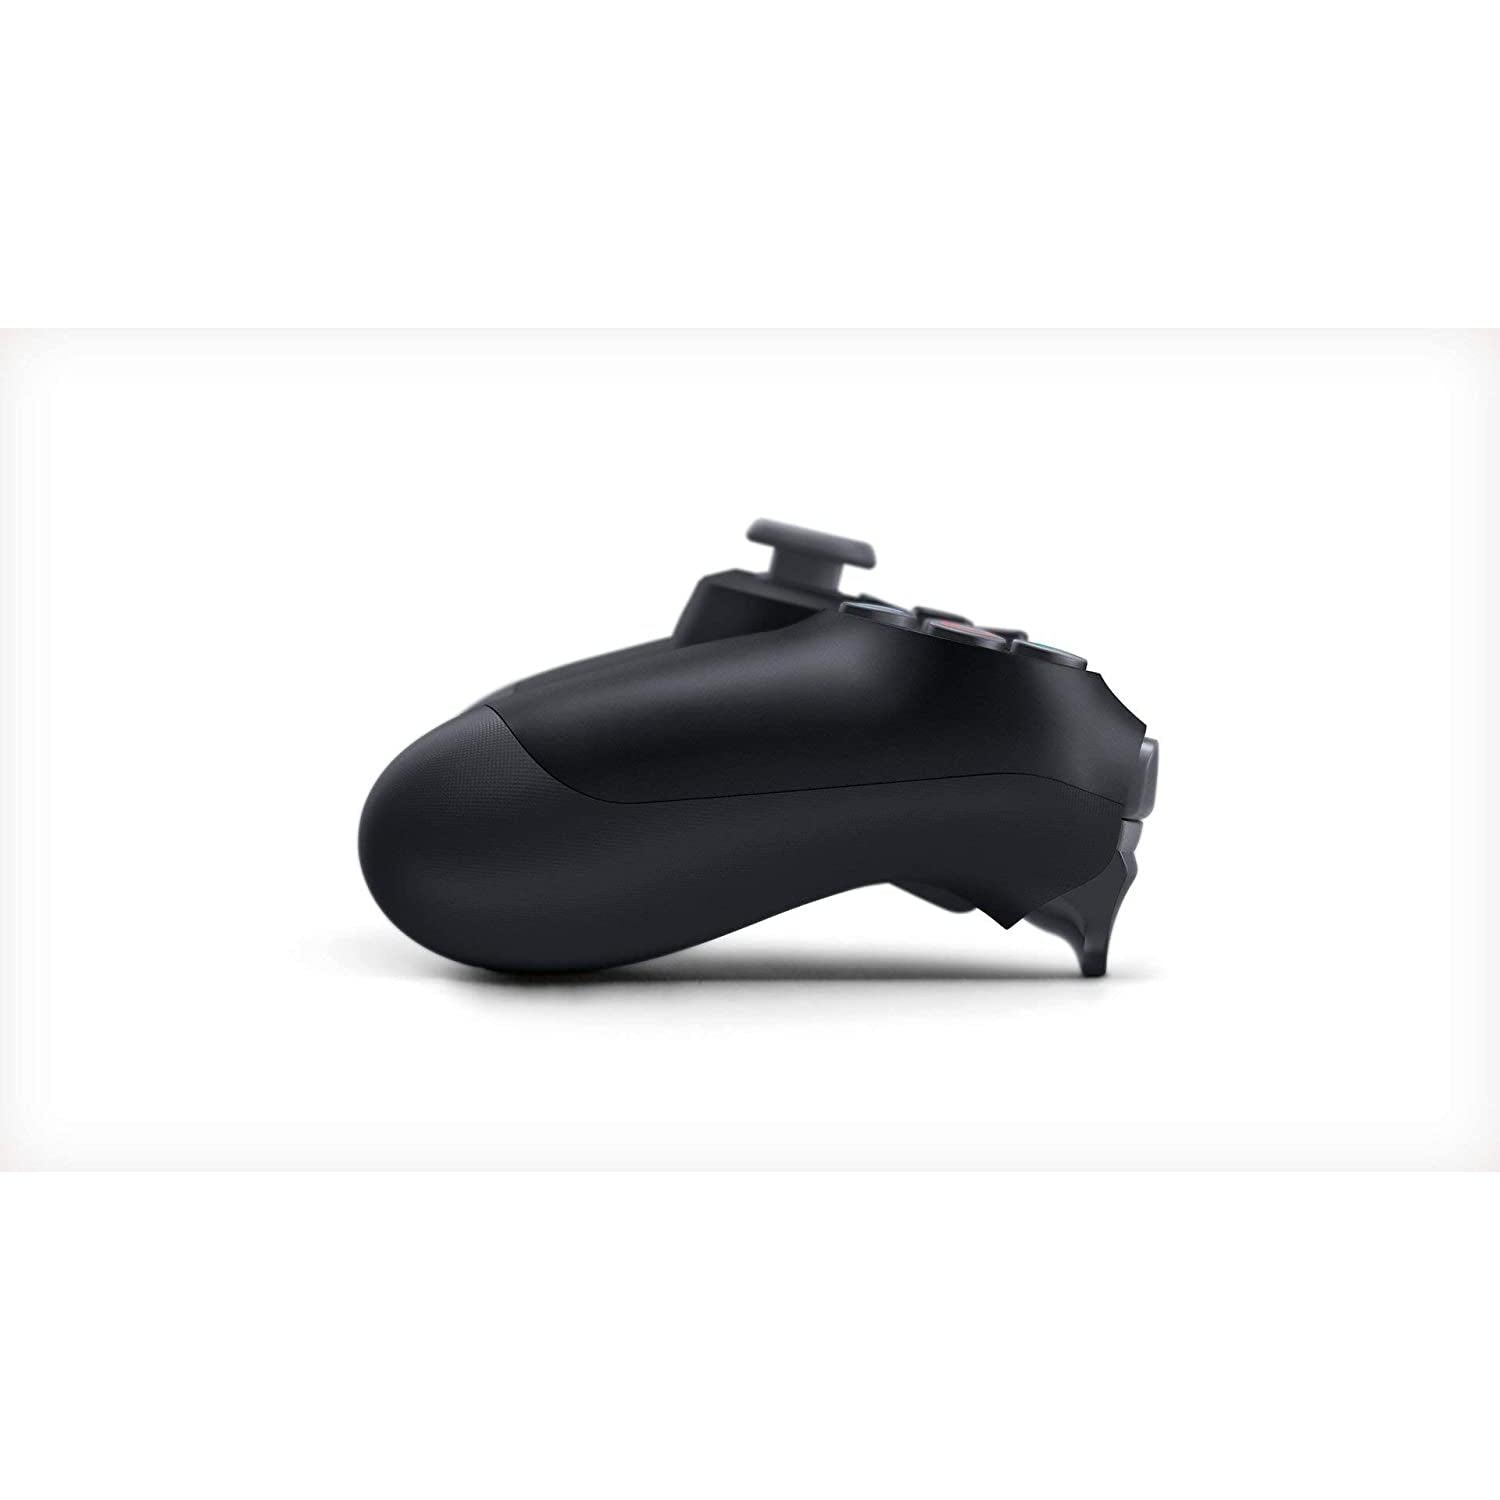 Sony-Official-PlayStation-DualShock-4-Controller-Black-4_c6b36bed-64d1-4d7c-bff7-d2a98291ab54